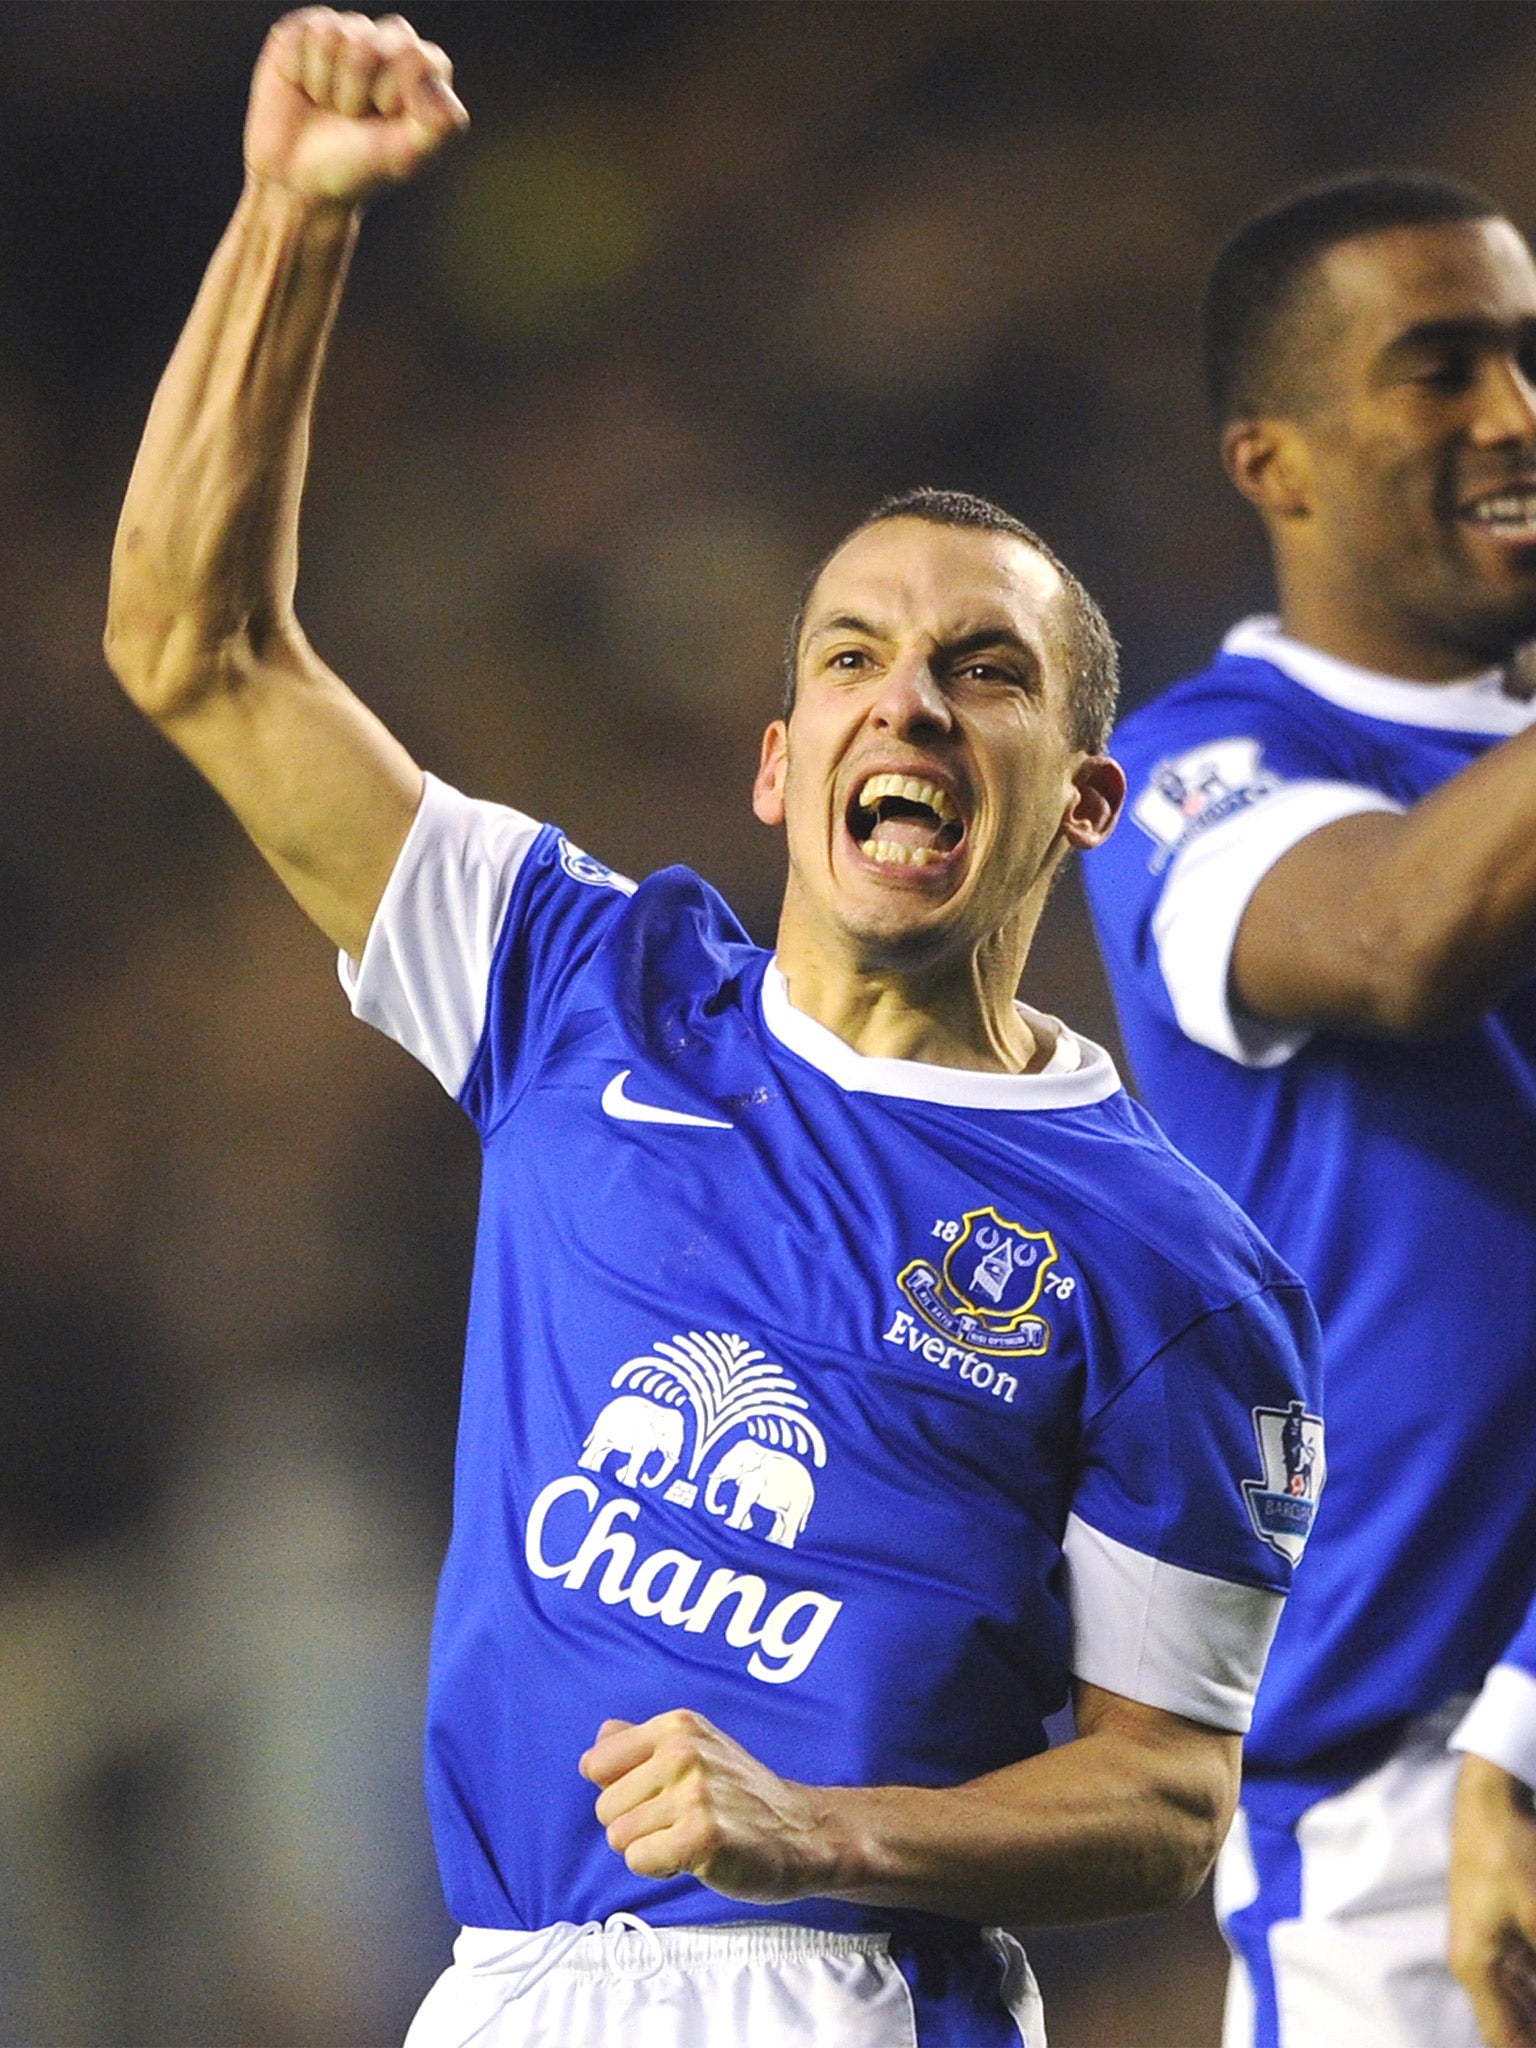 Osman: 'The more the years go by, the more we want to win'